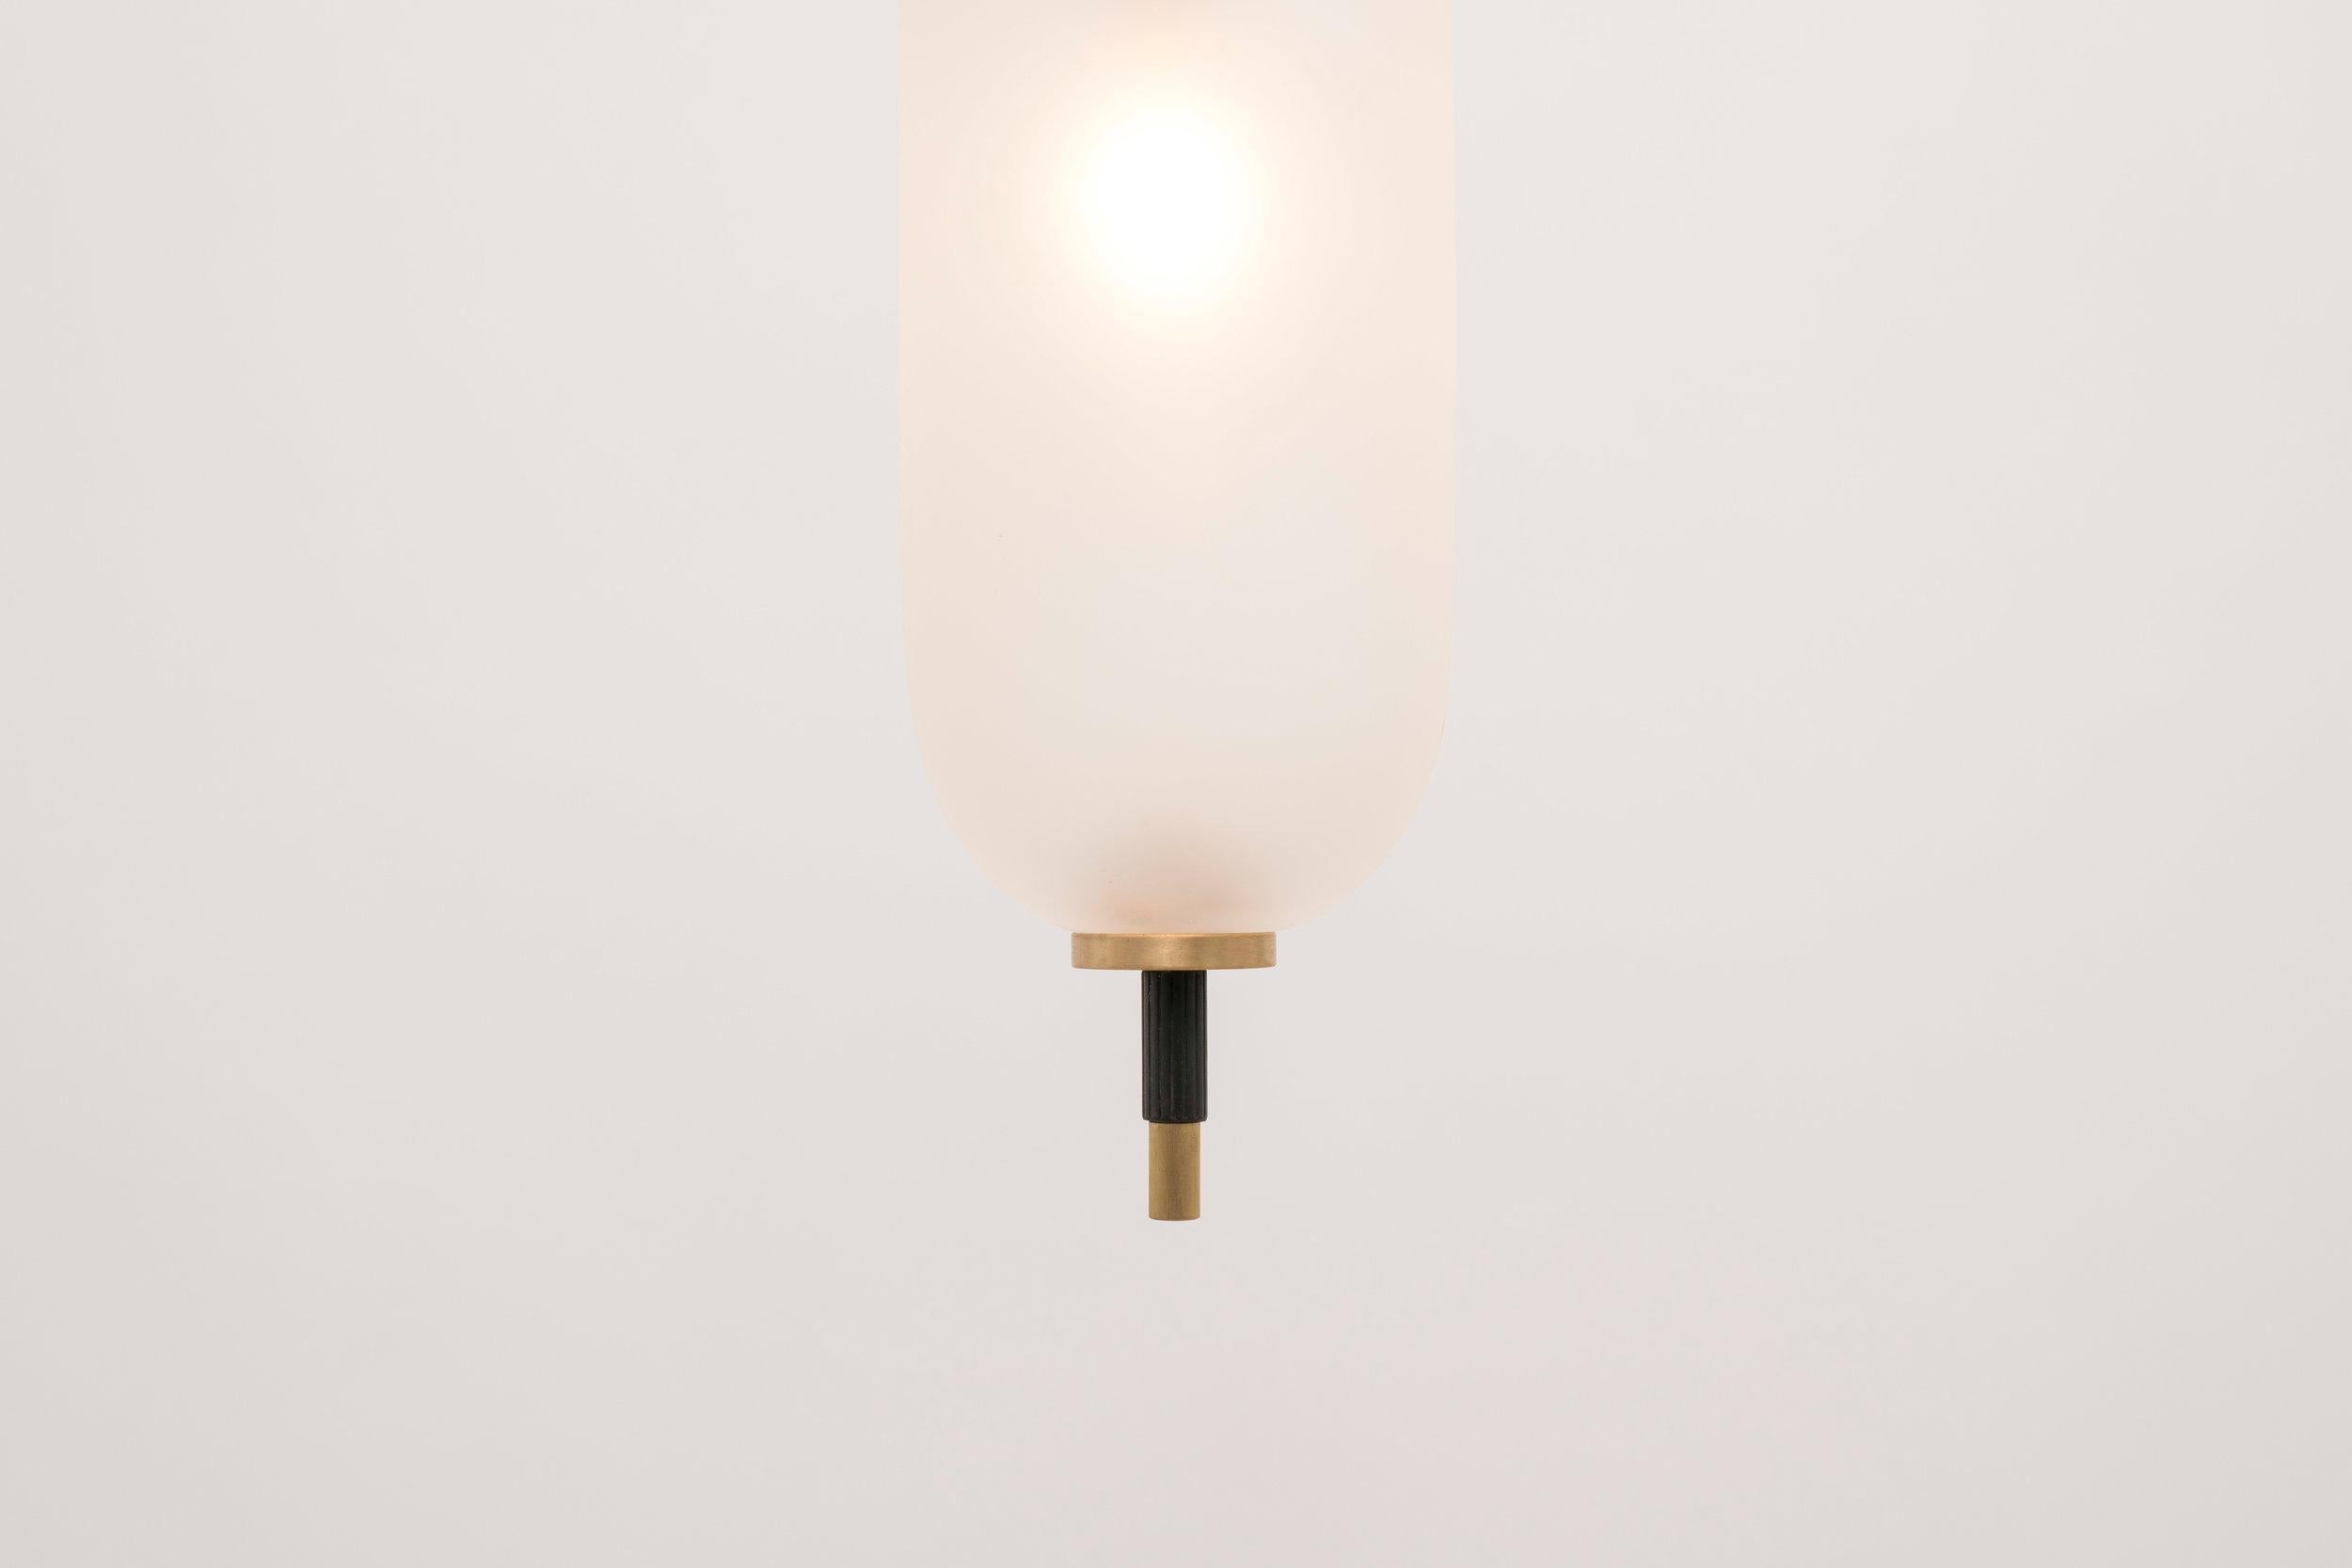 A jewel-like pendant composed of a brass stem with sandblasted glass orbs that seem to pierce through them. The bulb inside the glass orb emits a defused glow from the center of its core. Stem height customized for each application.

UL listed.